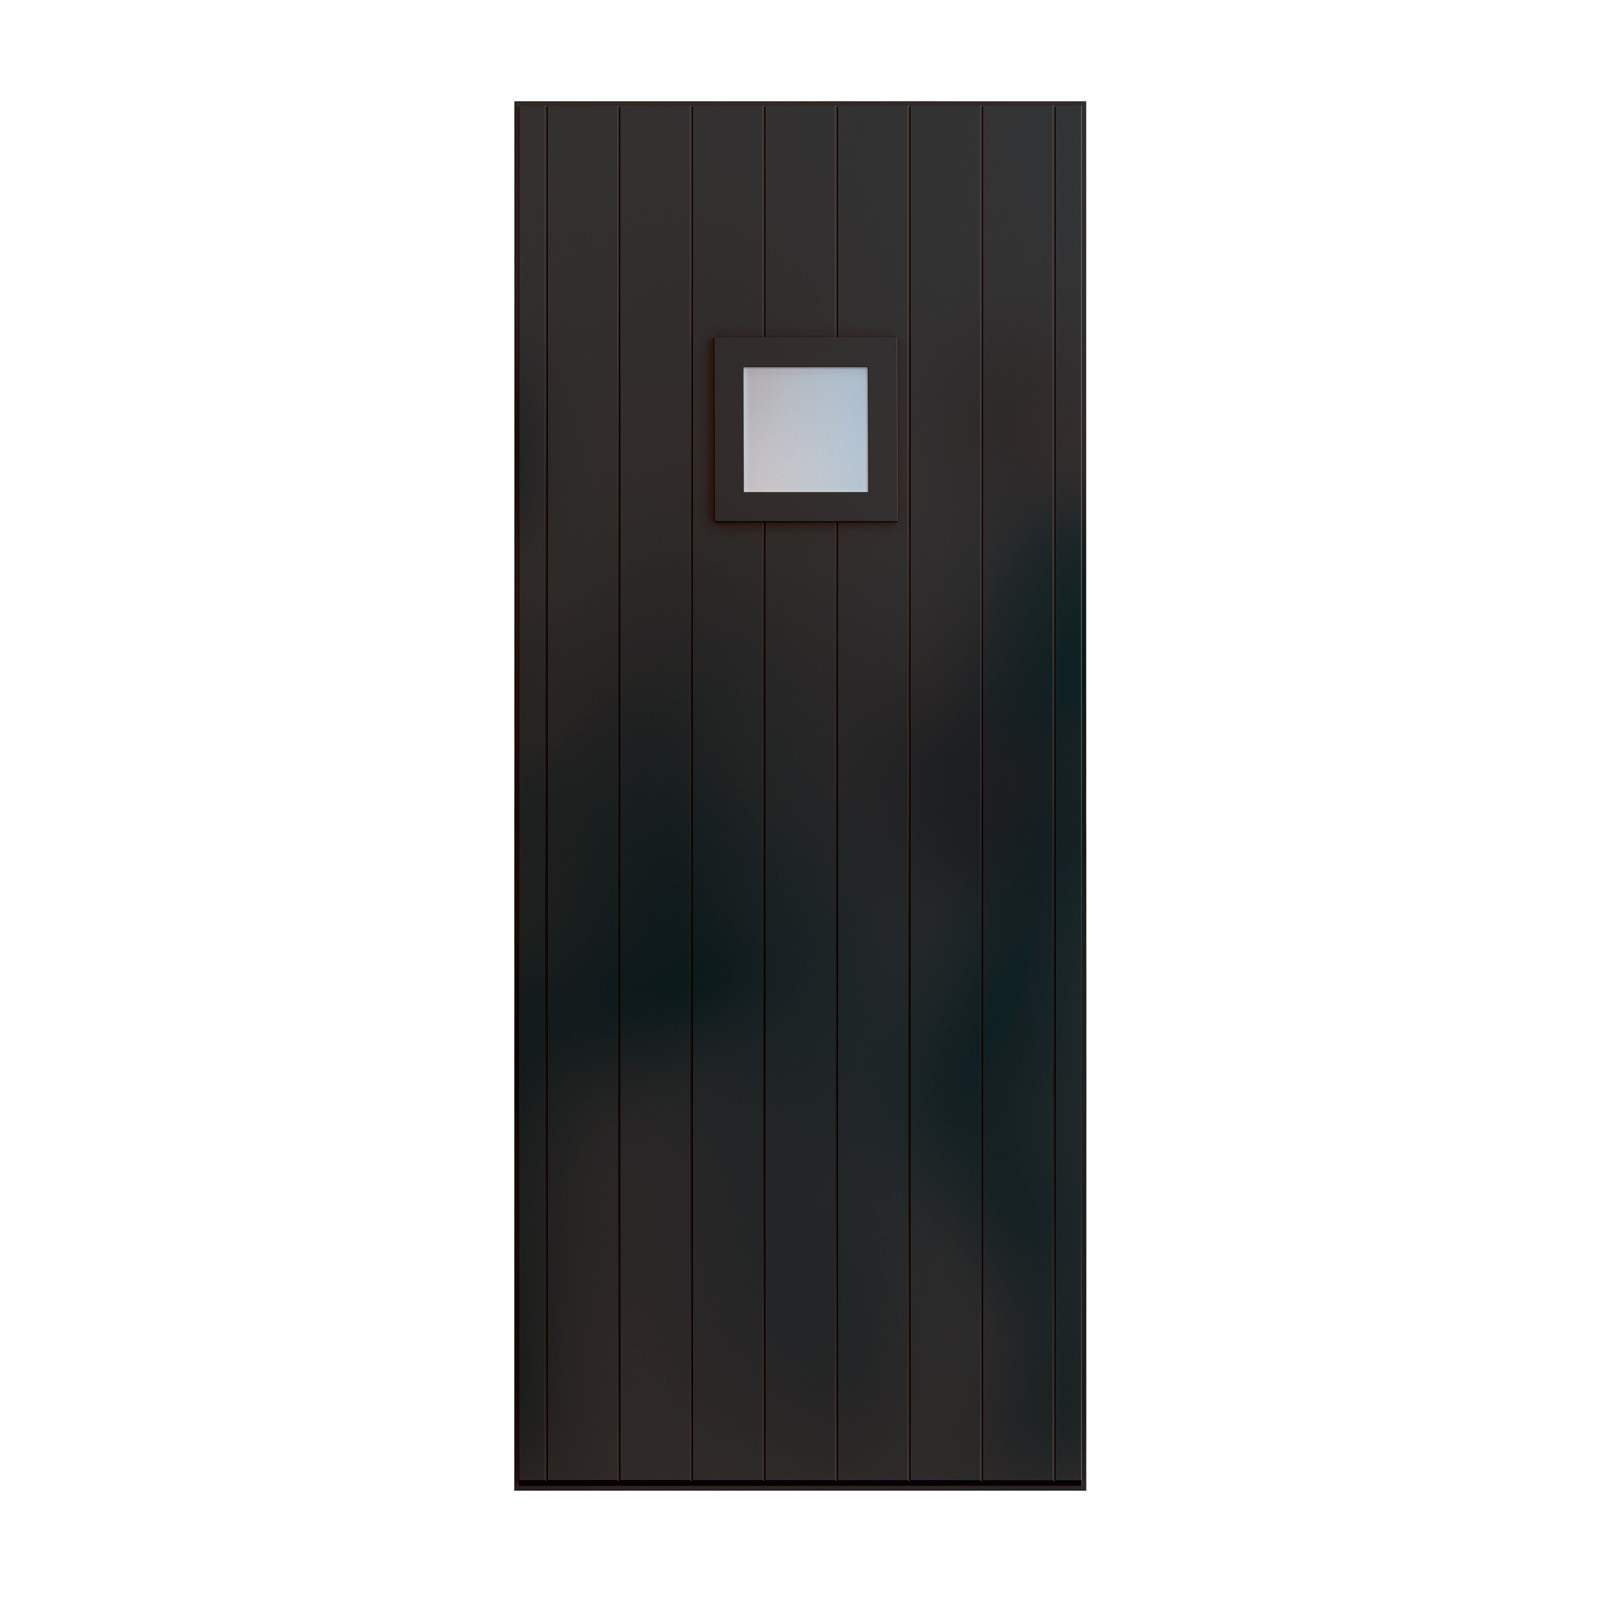 Alitherm 400 Door with PT0002P panel